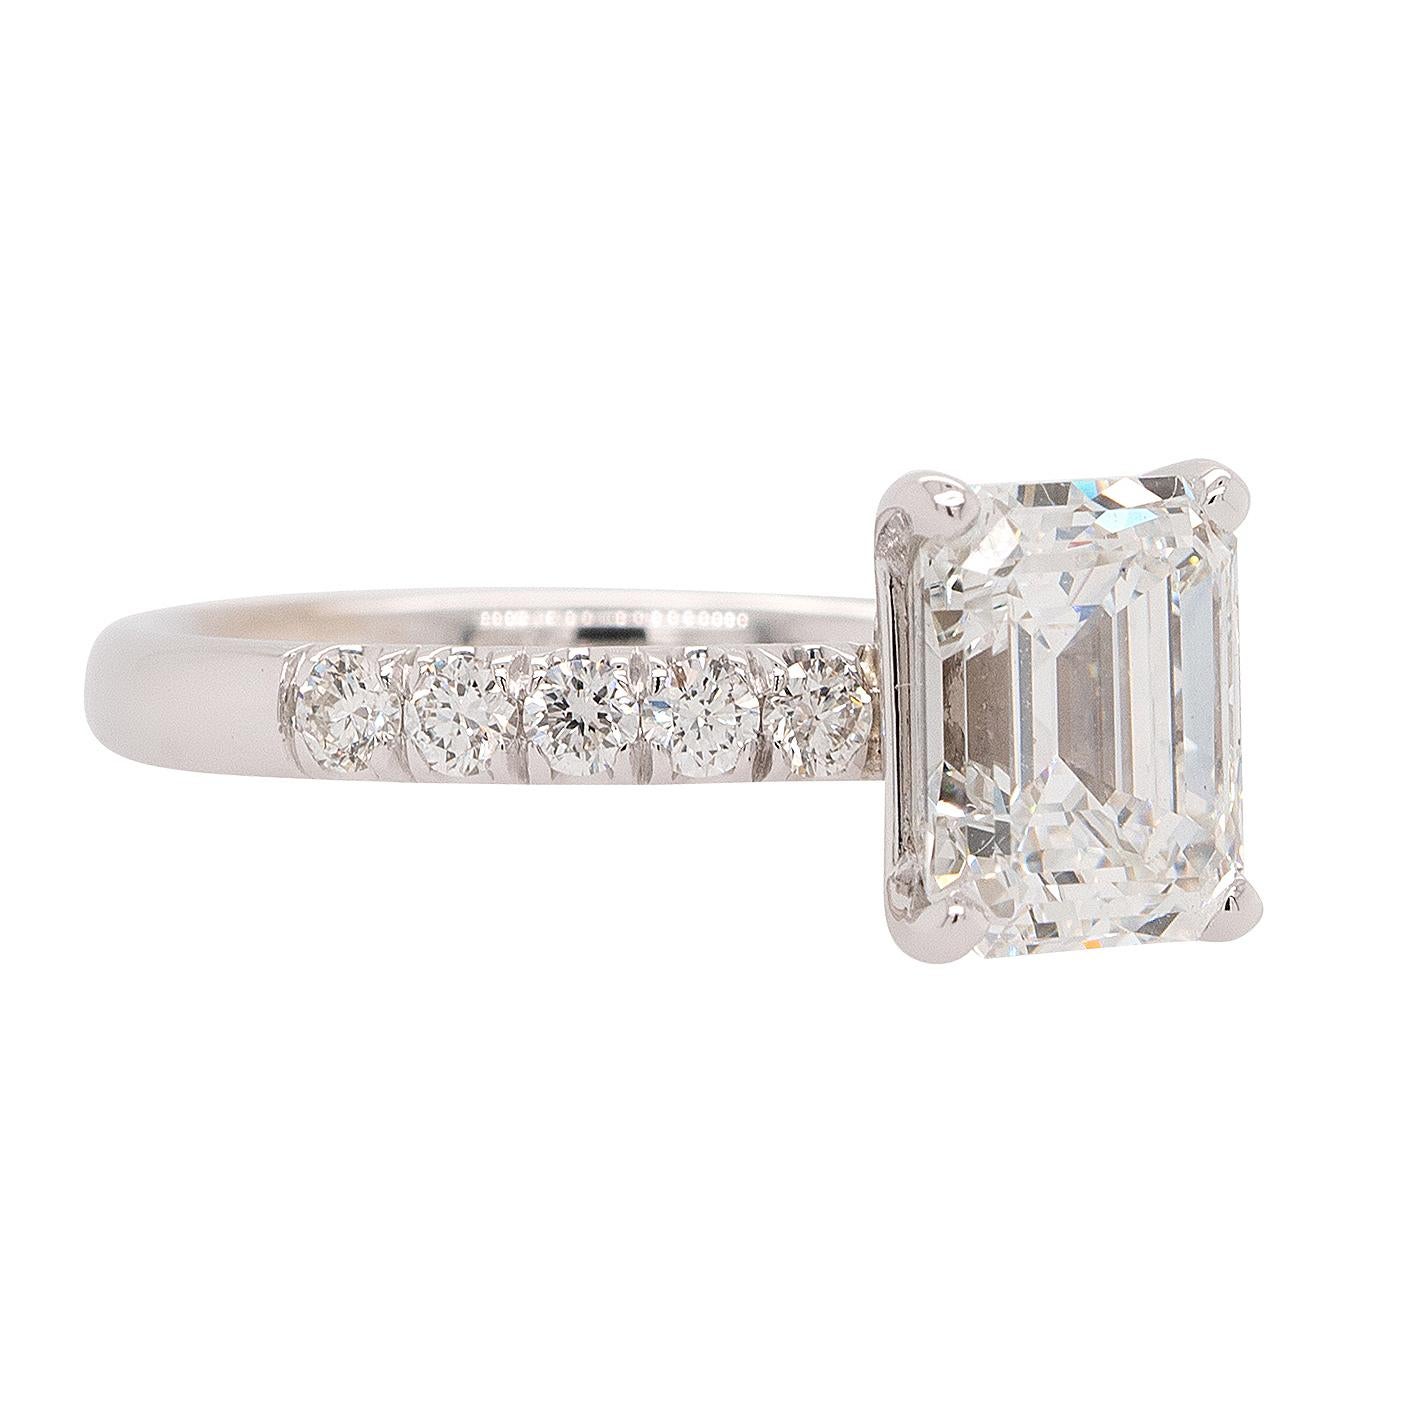 3.03 Carat Emerald Cut GIA Natural Diamond Engagement Ring For Sale 4